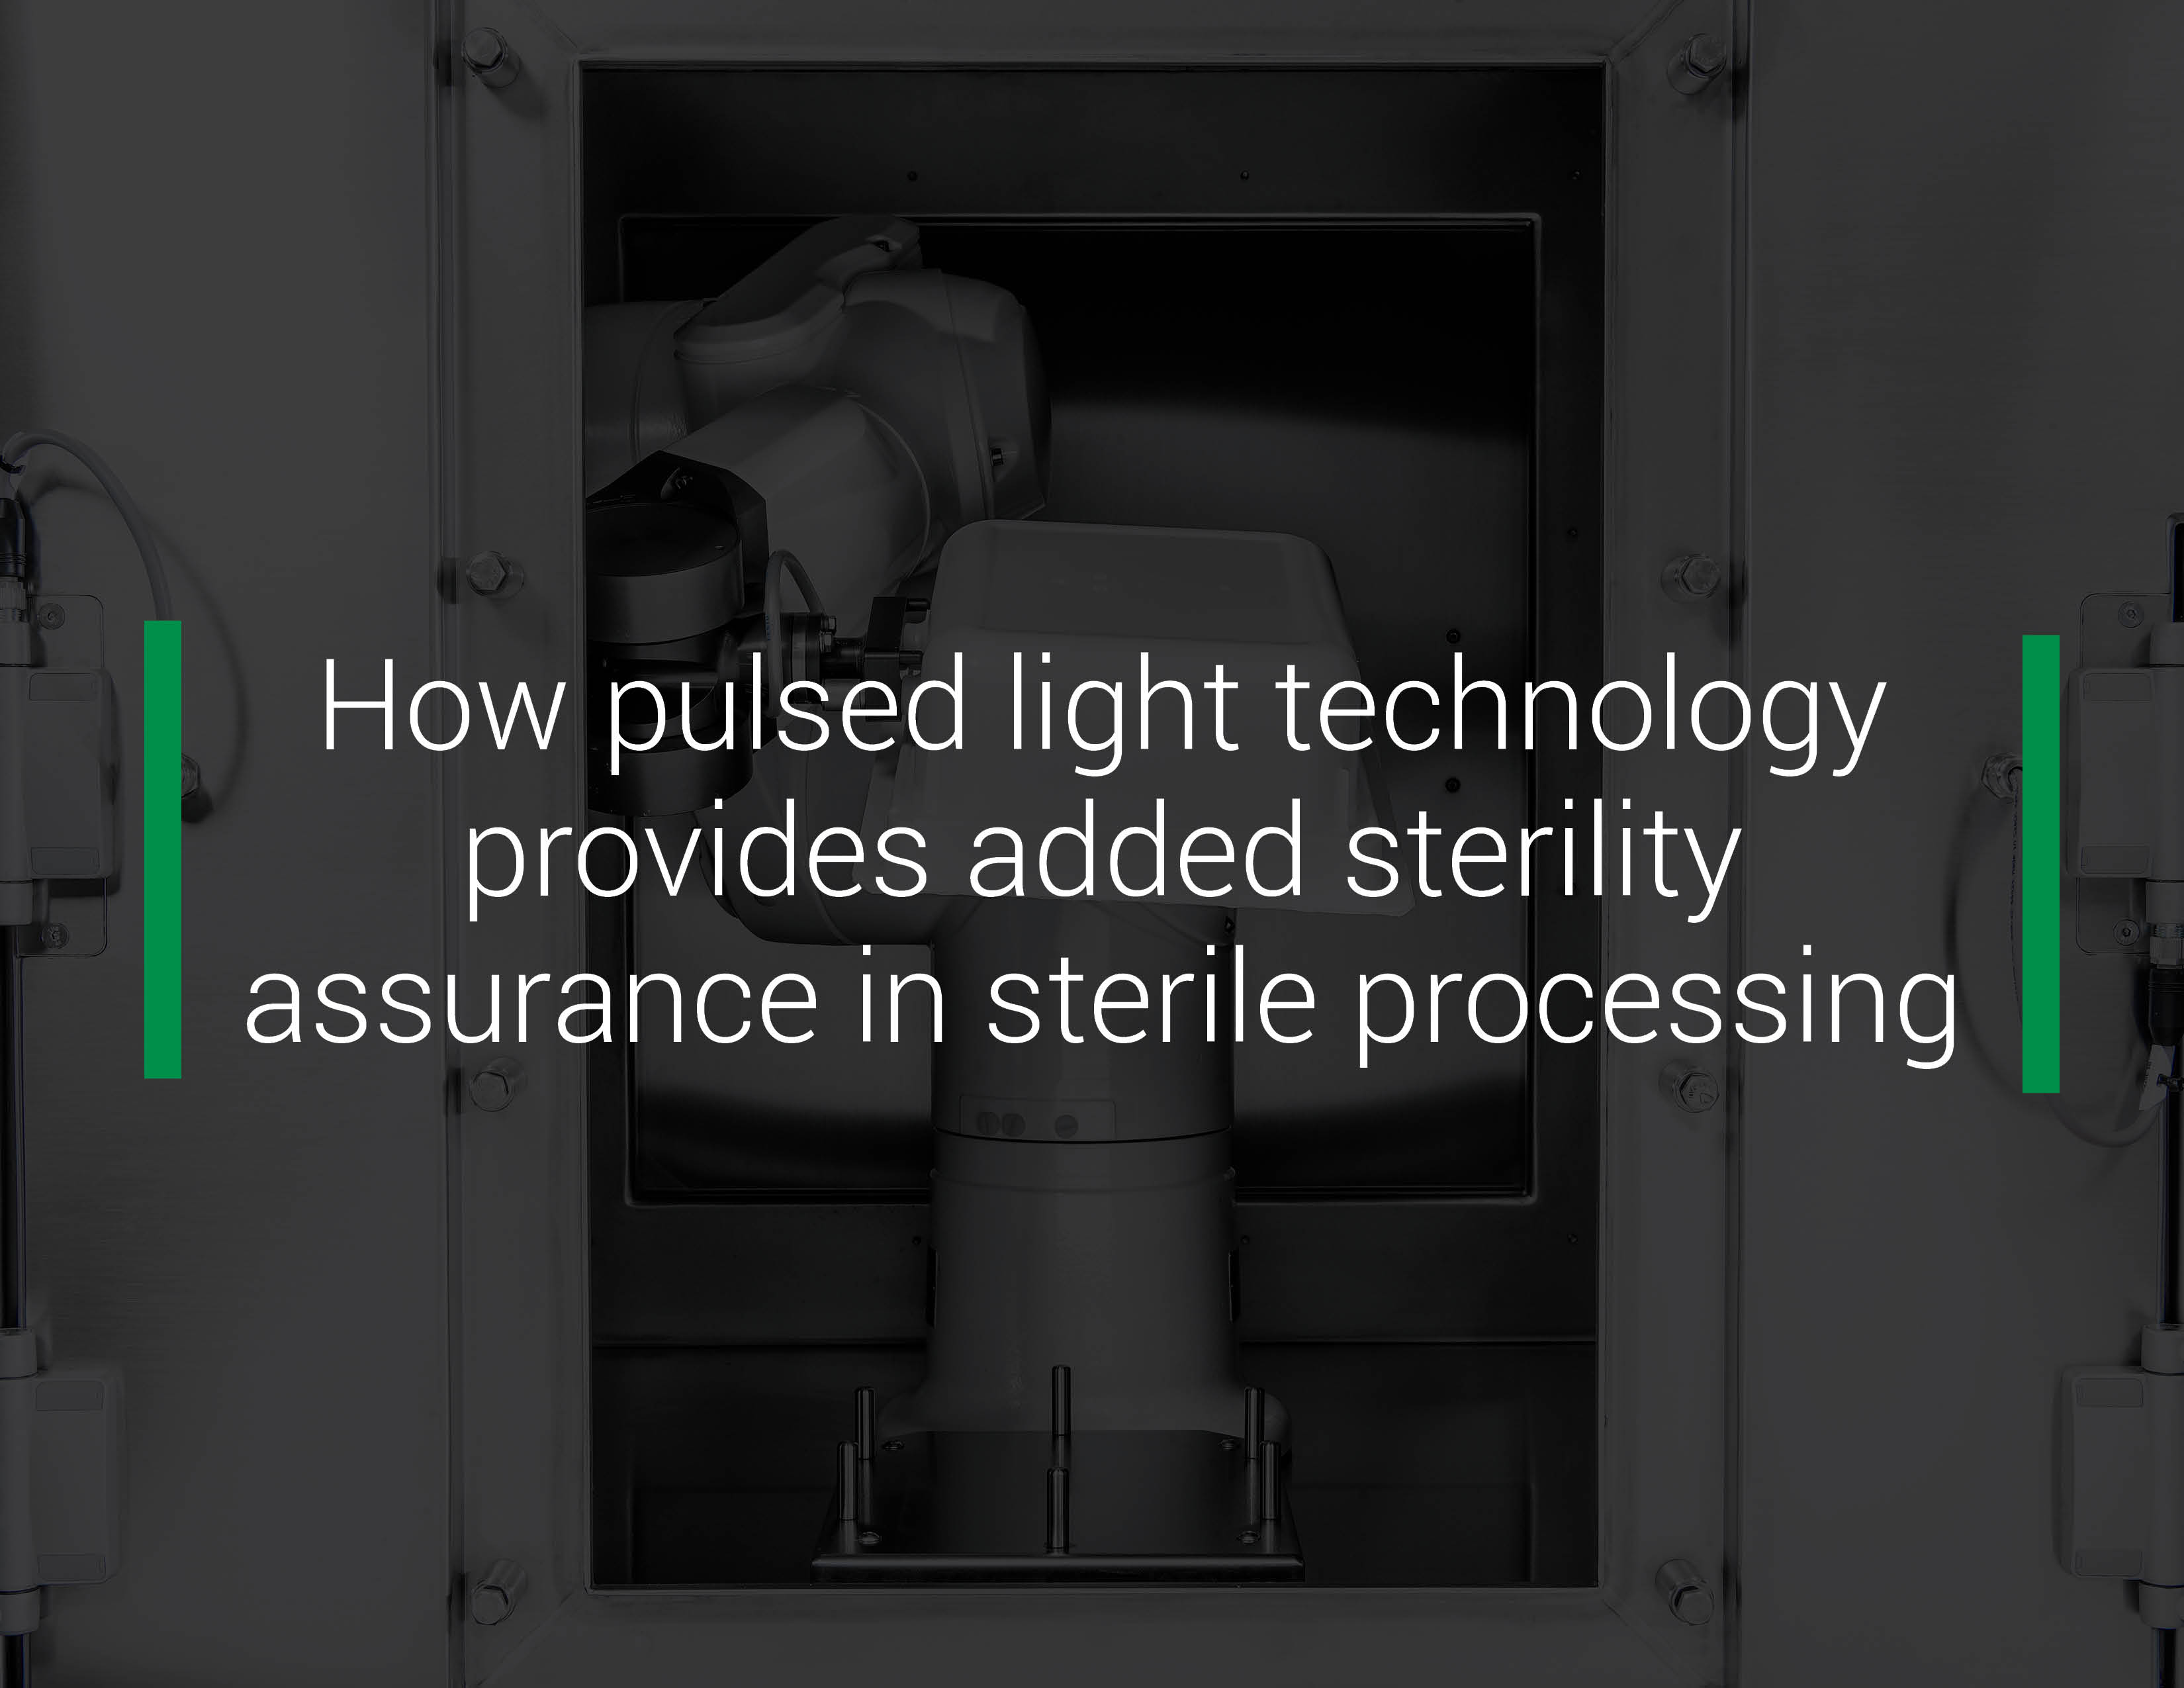 Berkshire Sterile Manufacturing, Claranor, and Steriline will present a new technology in fill finish during a webinar on March 10, 2021 at 1PM EST.